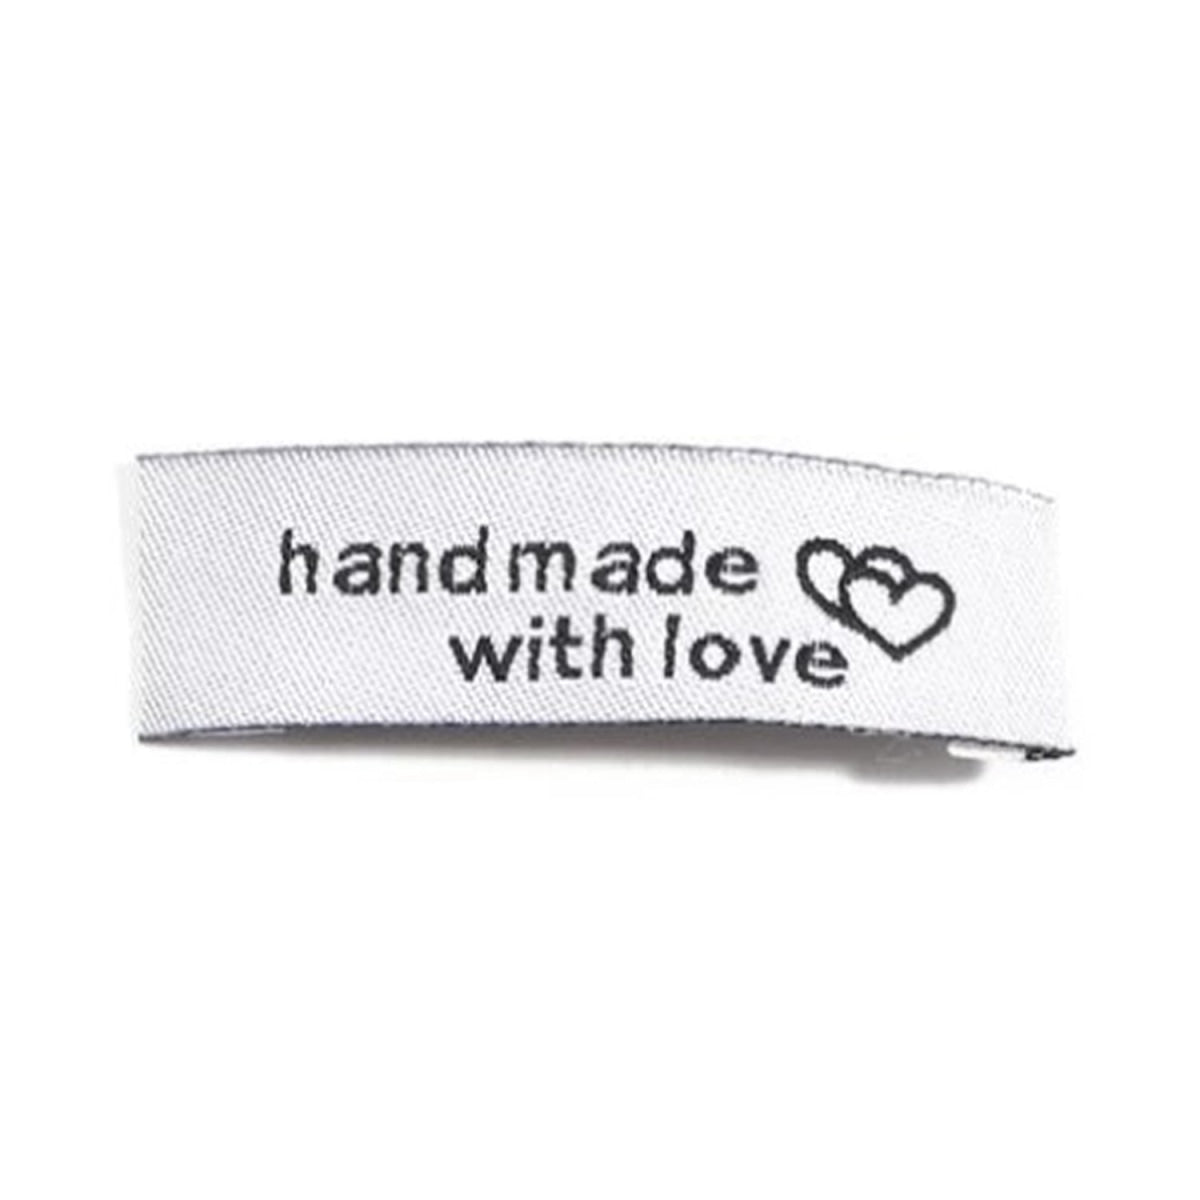 20pcs Sewing Tags Clothing Labels Cloth Fabric "Handmade with Love" Bags DIY - White - - Asia Sell